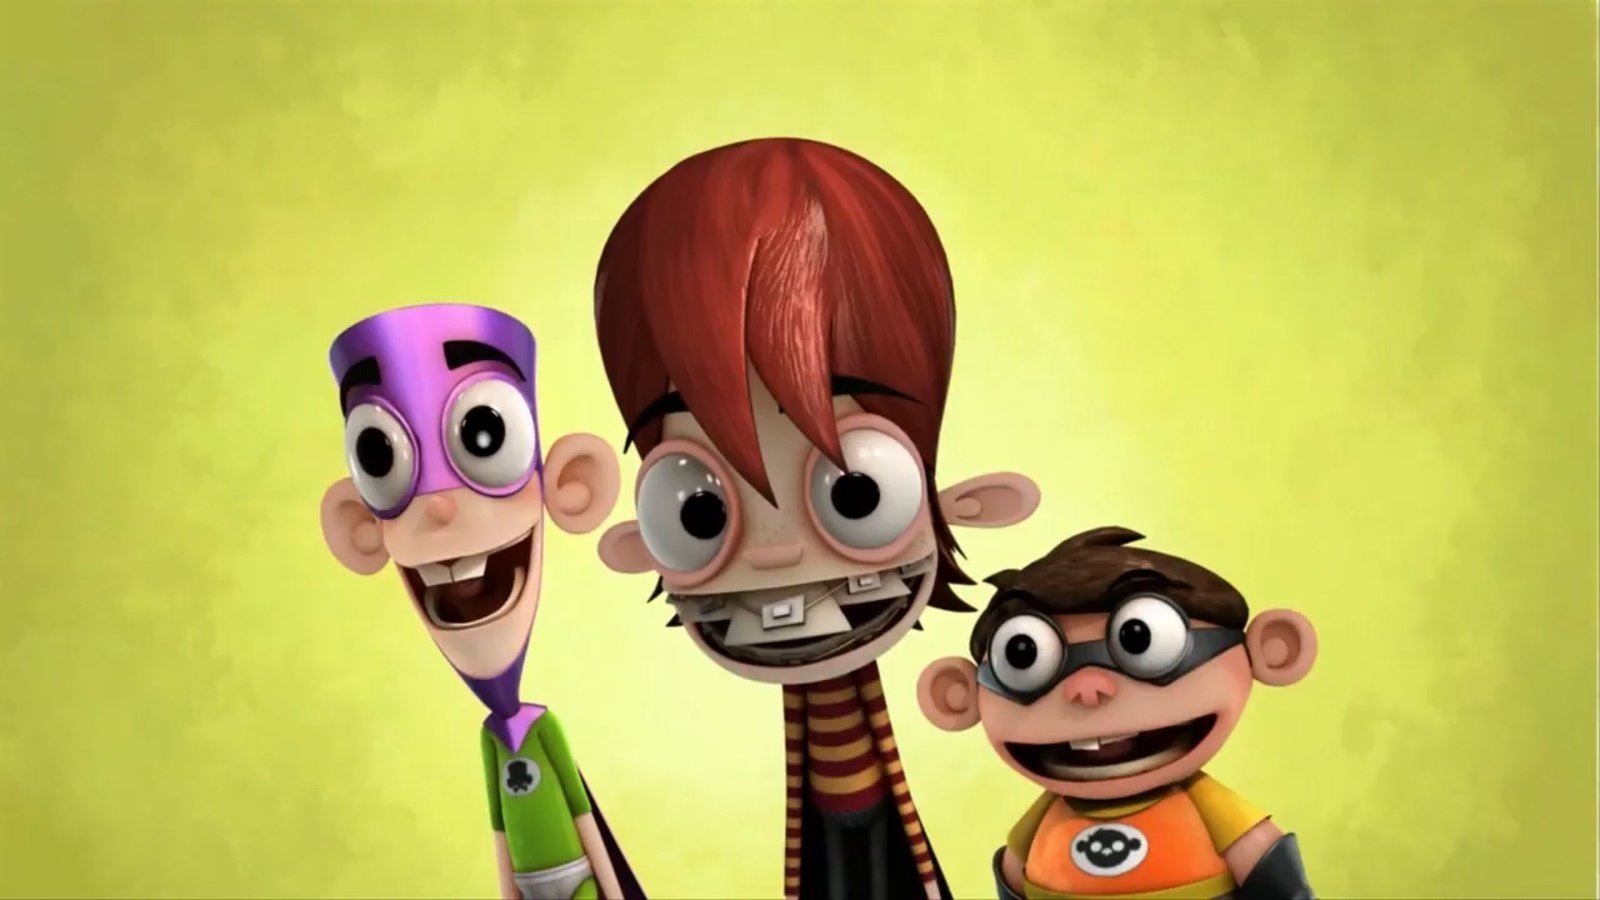 Petition · Bring Fanboy and chum chum back. · Change.org